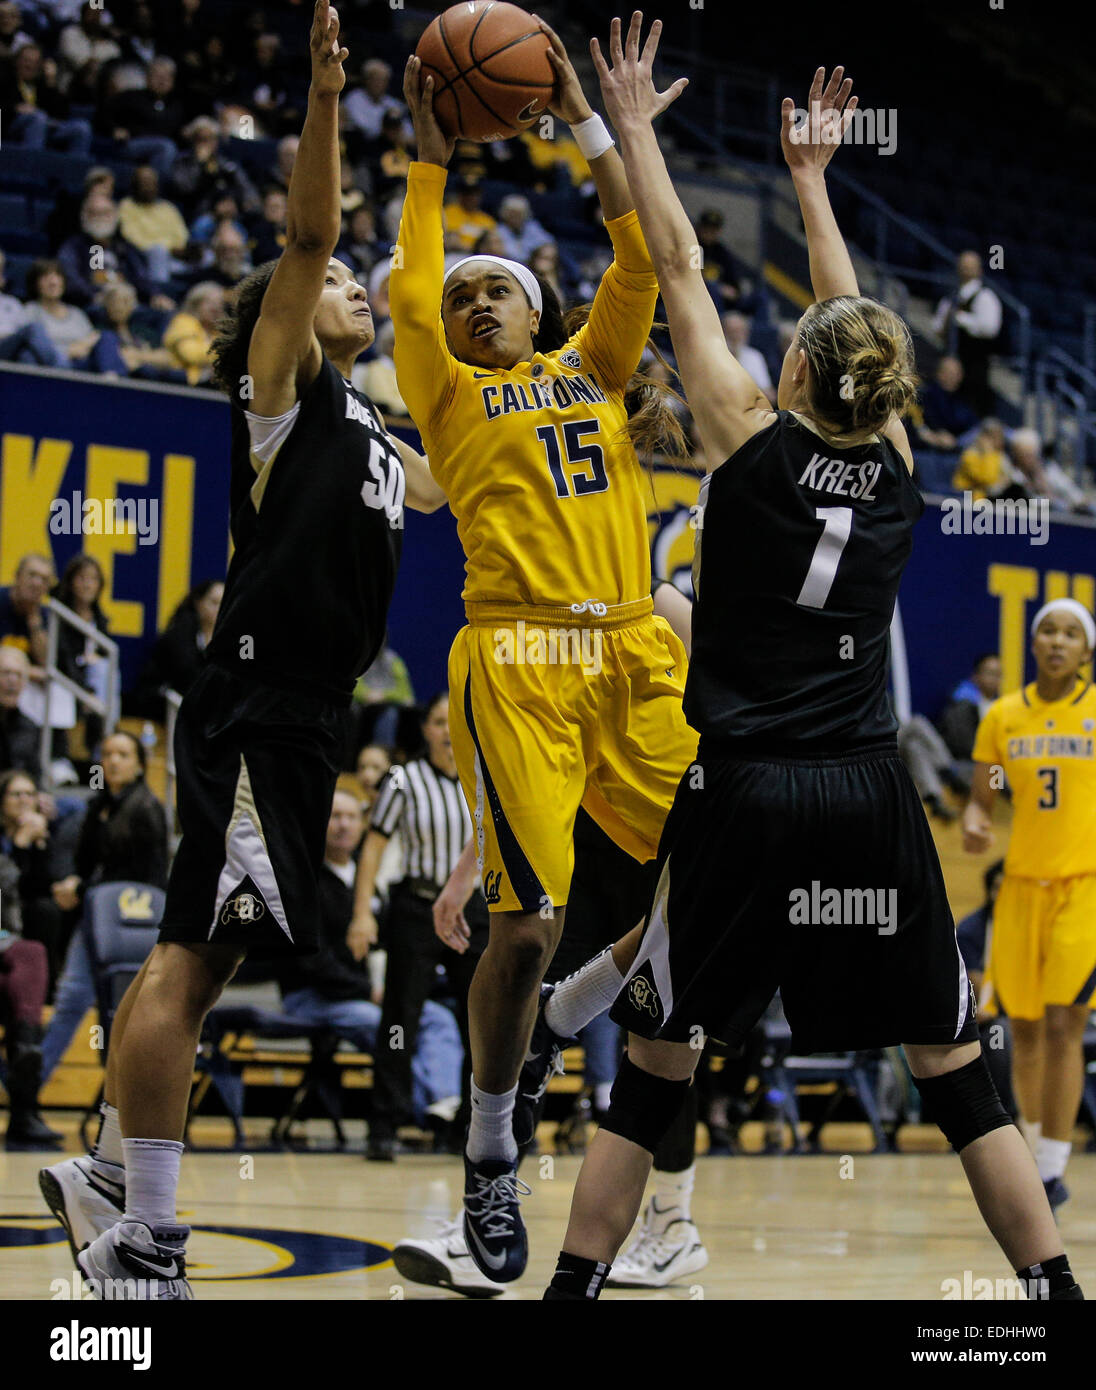 Berkeley CA. 05th Jan, 2015. California G # 15 Brittany Boyd force her way in the paint and score during NCAA Women's Basketball game between Colorado Buffaloes and California Golden Bears 75-59 win at Hass Pavilion Berkeley Calif. © csm/Alamy Live News Stock Photo